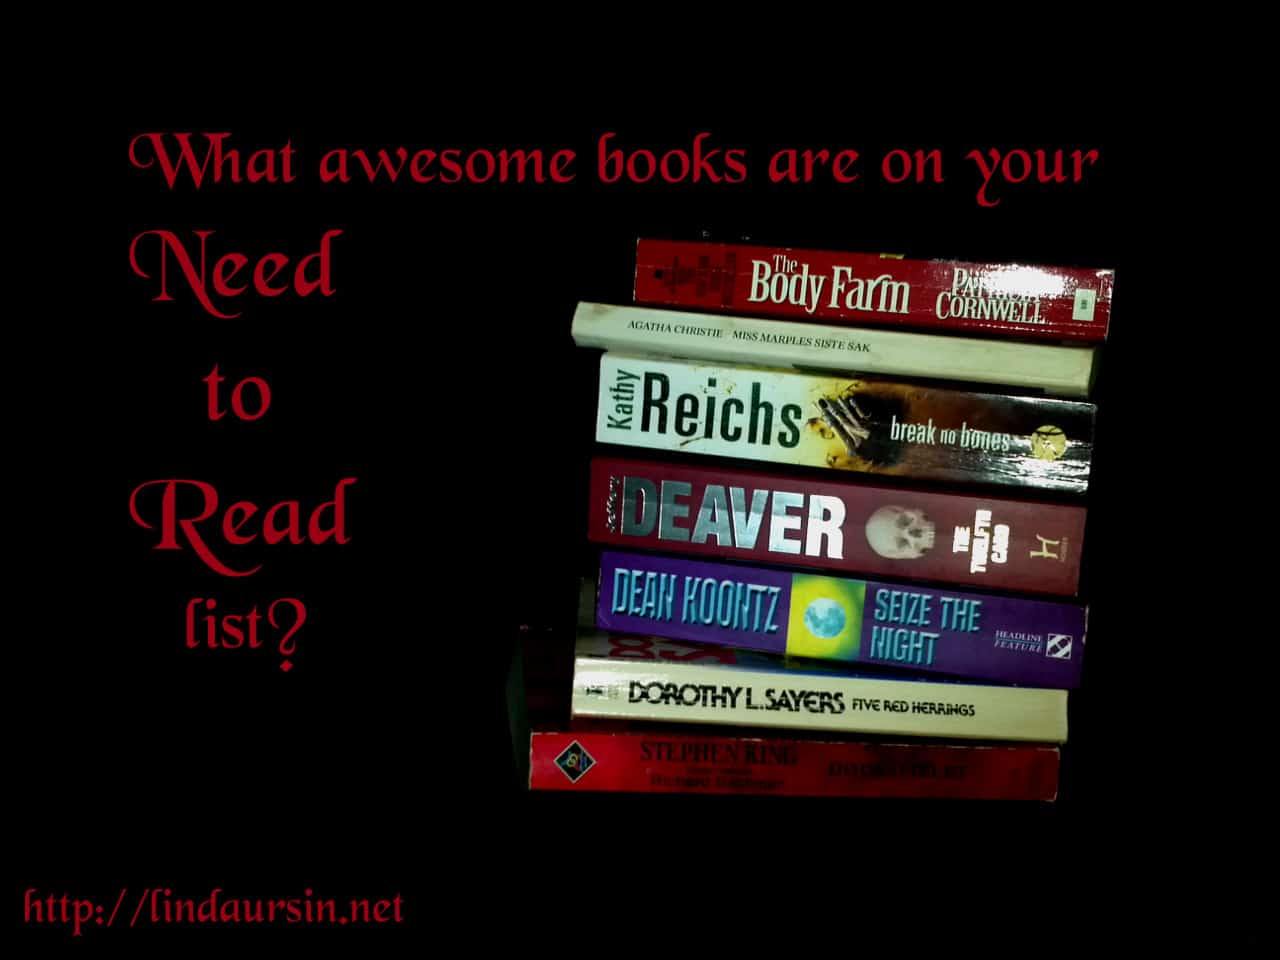 What awesome books do you need to read?